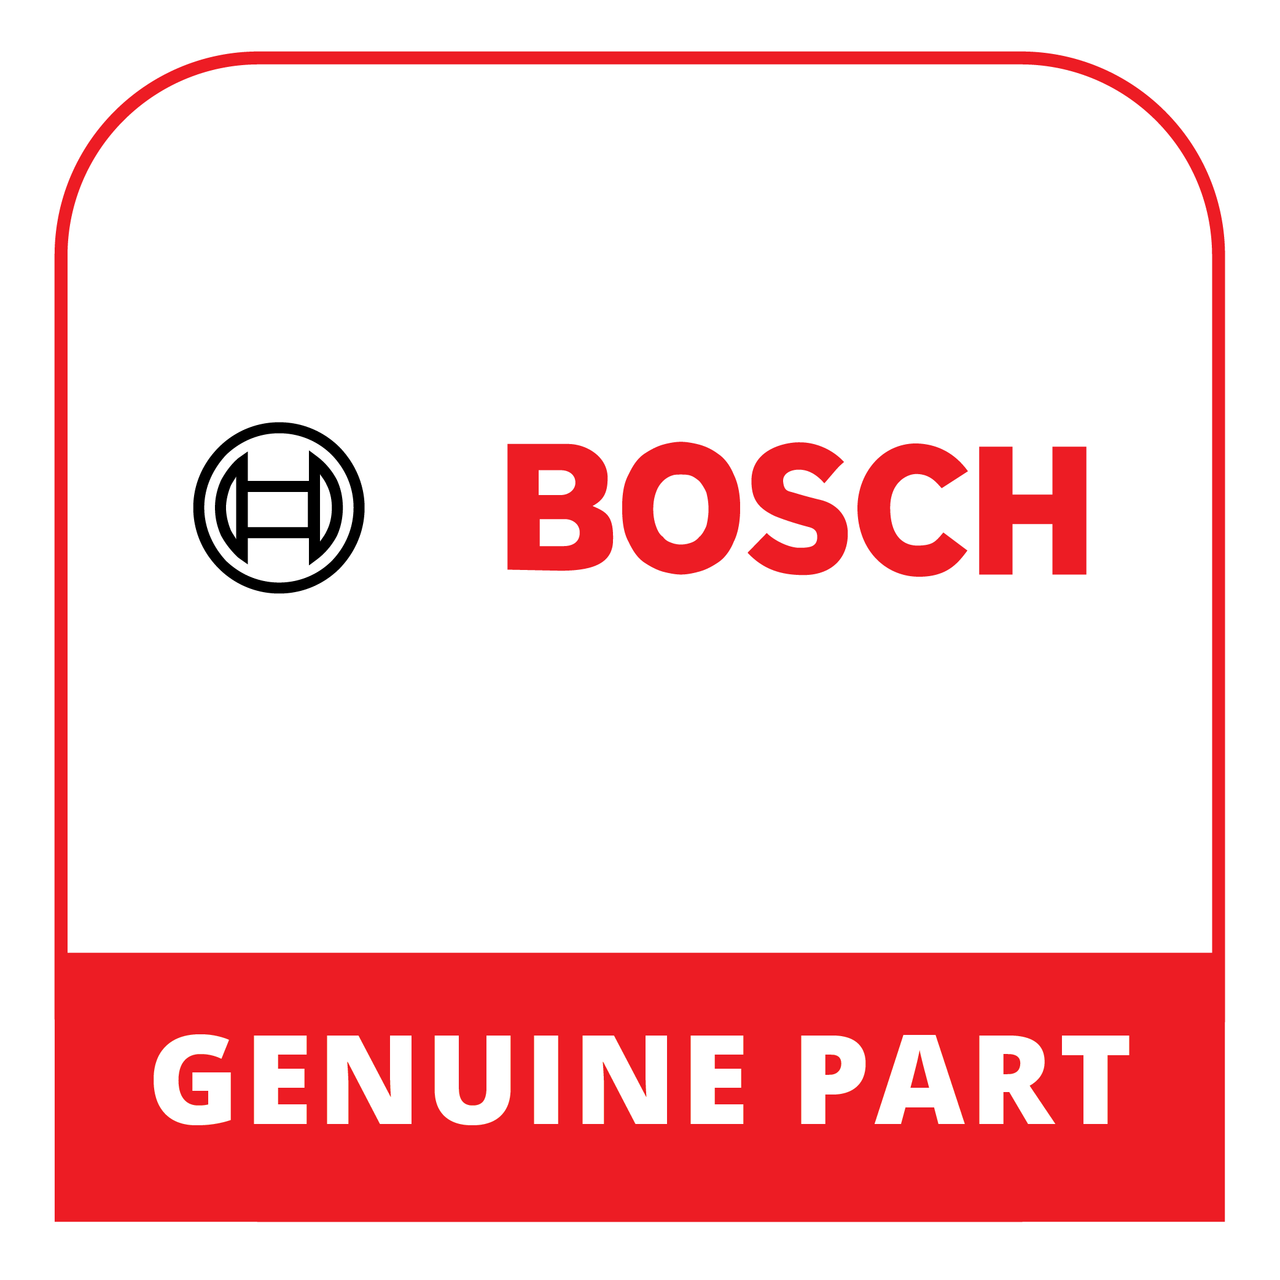 Bosch (Thermador) 20001525 - Panel - Genuine Bosch (Thermador) Part